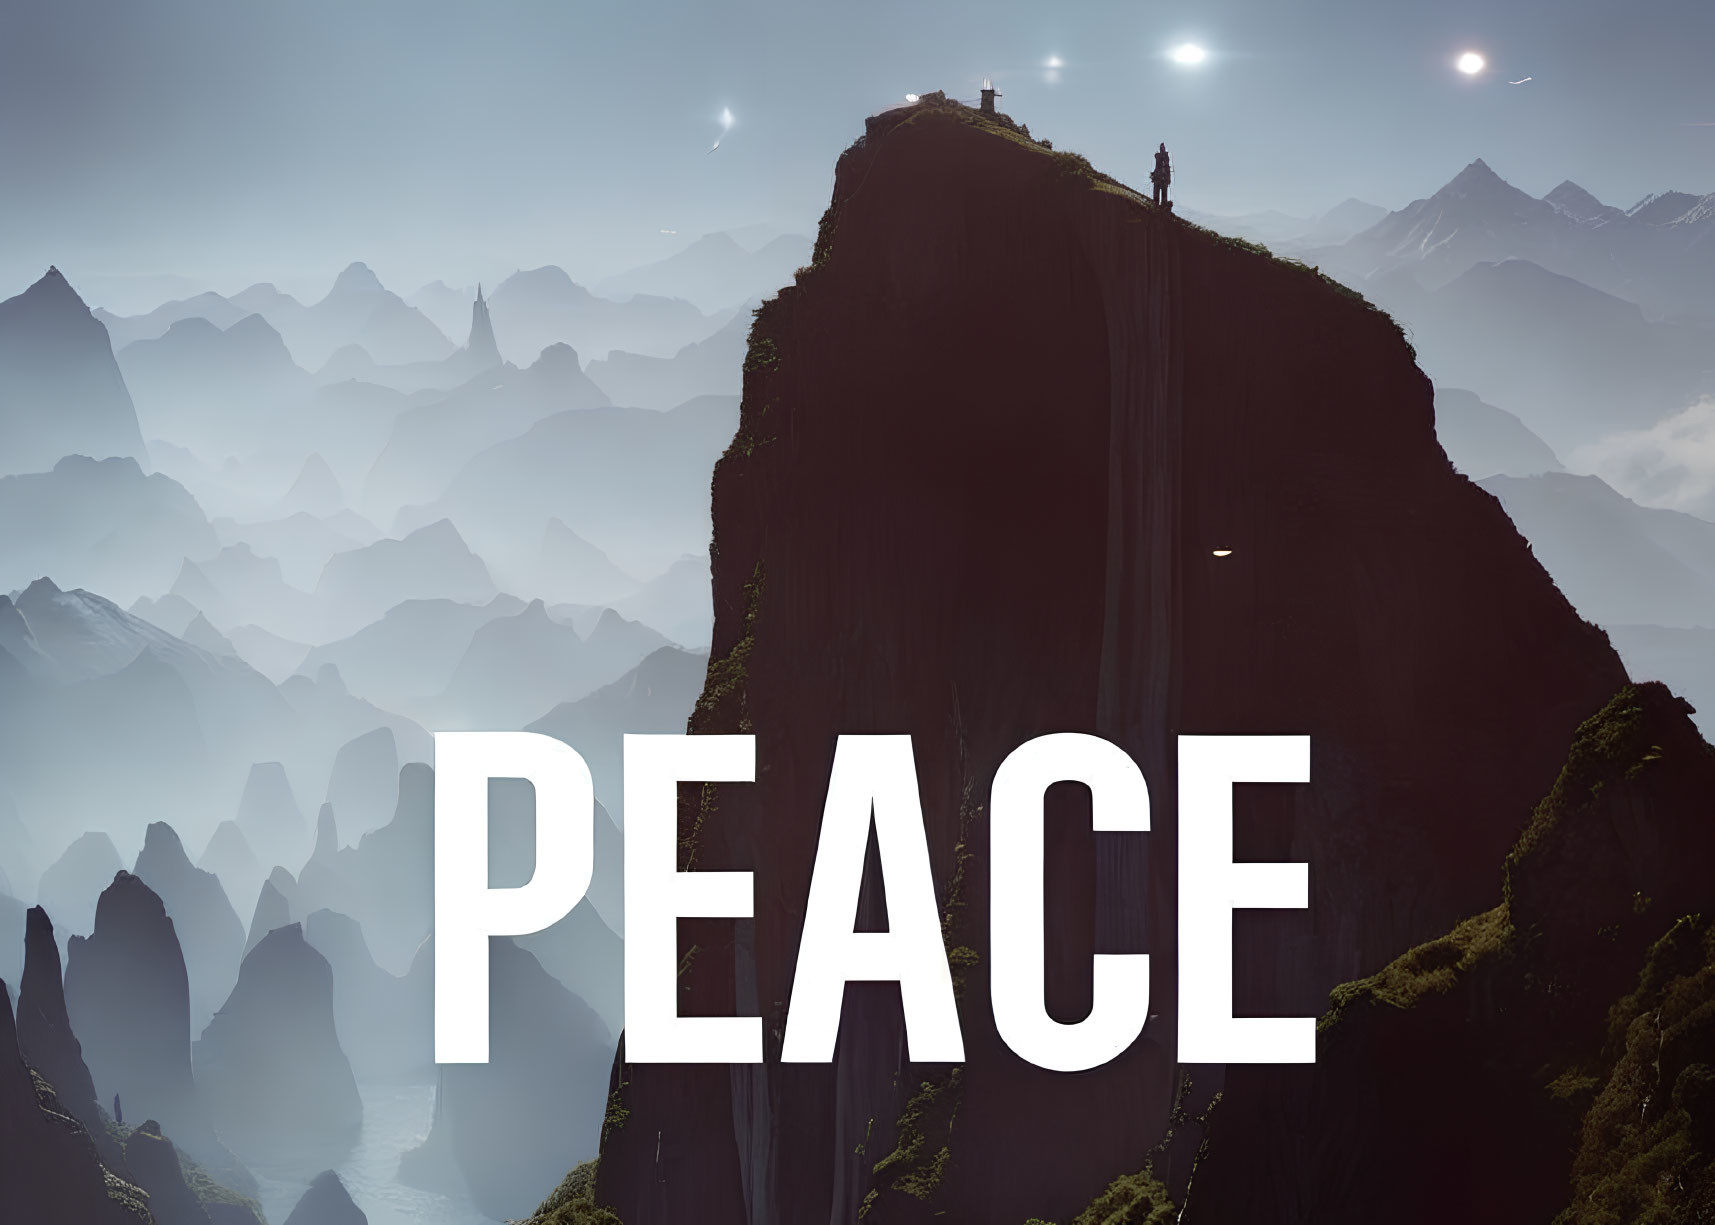 Person on Cliff Overlooking Mountain Peaks with "PEACE" Overlay